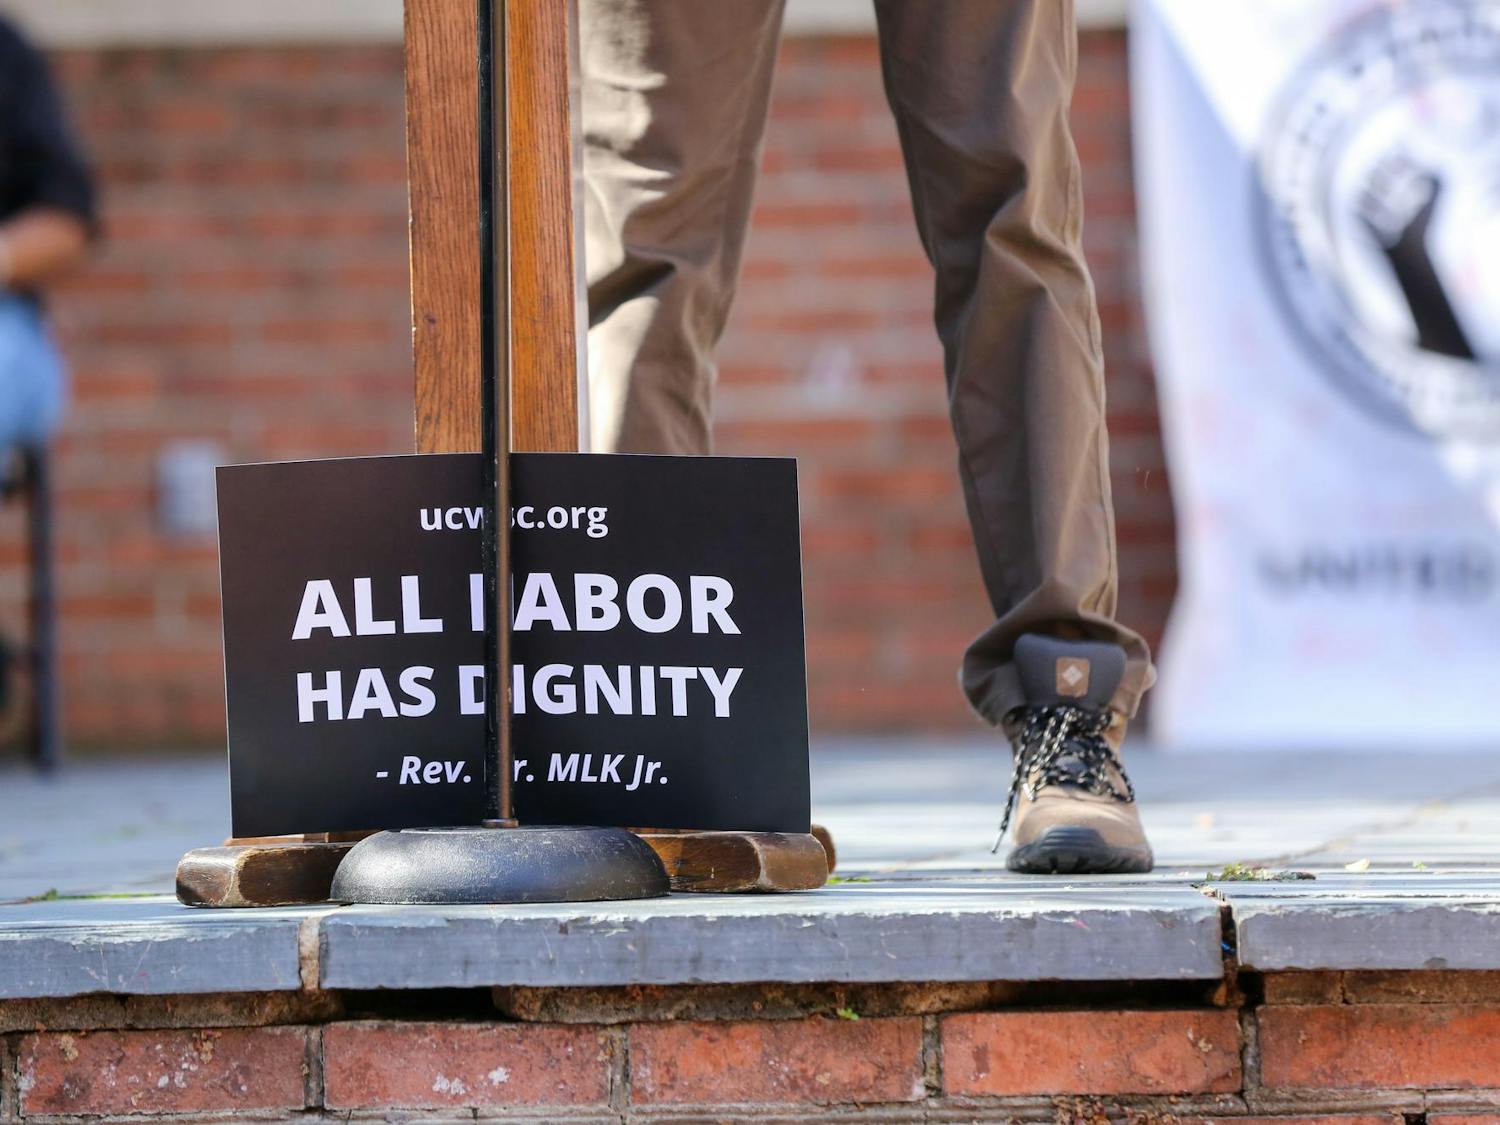 A sign of a quote by Martin Luther King Jr. stating "All labor has dignity" sits in front of the podium during a USC worker speak-out event held on the Russell House patio on Oct. 26, 2023. Employees across the university gathered to push for an increase in minimum wage.